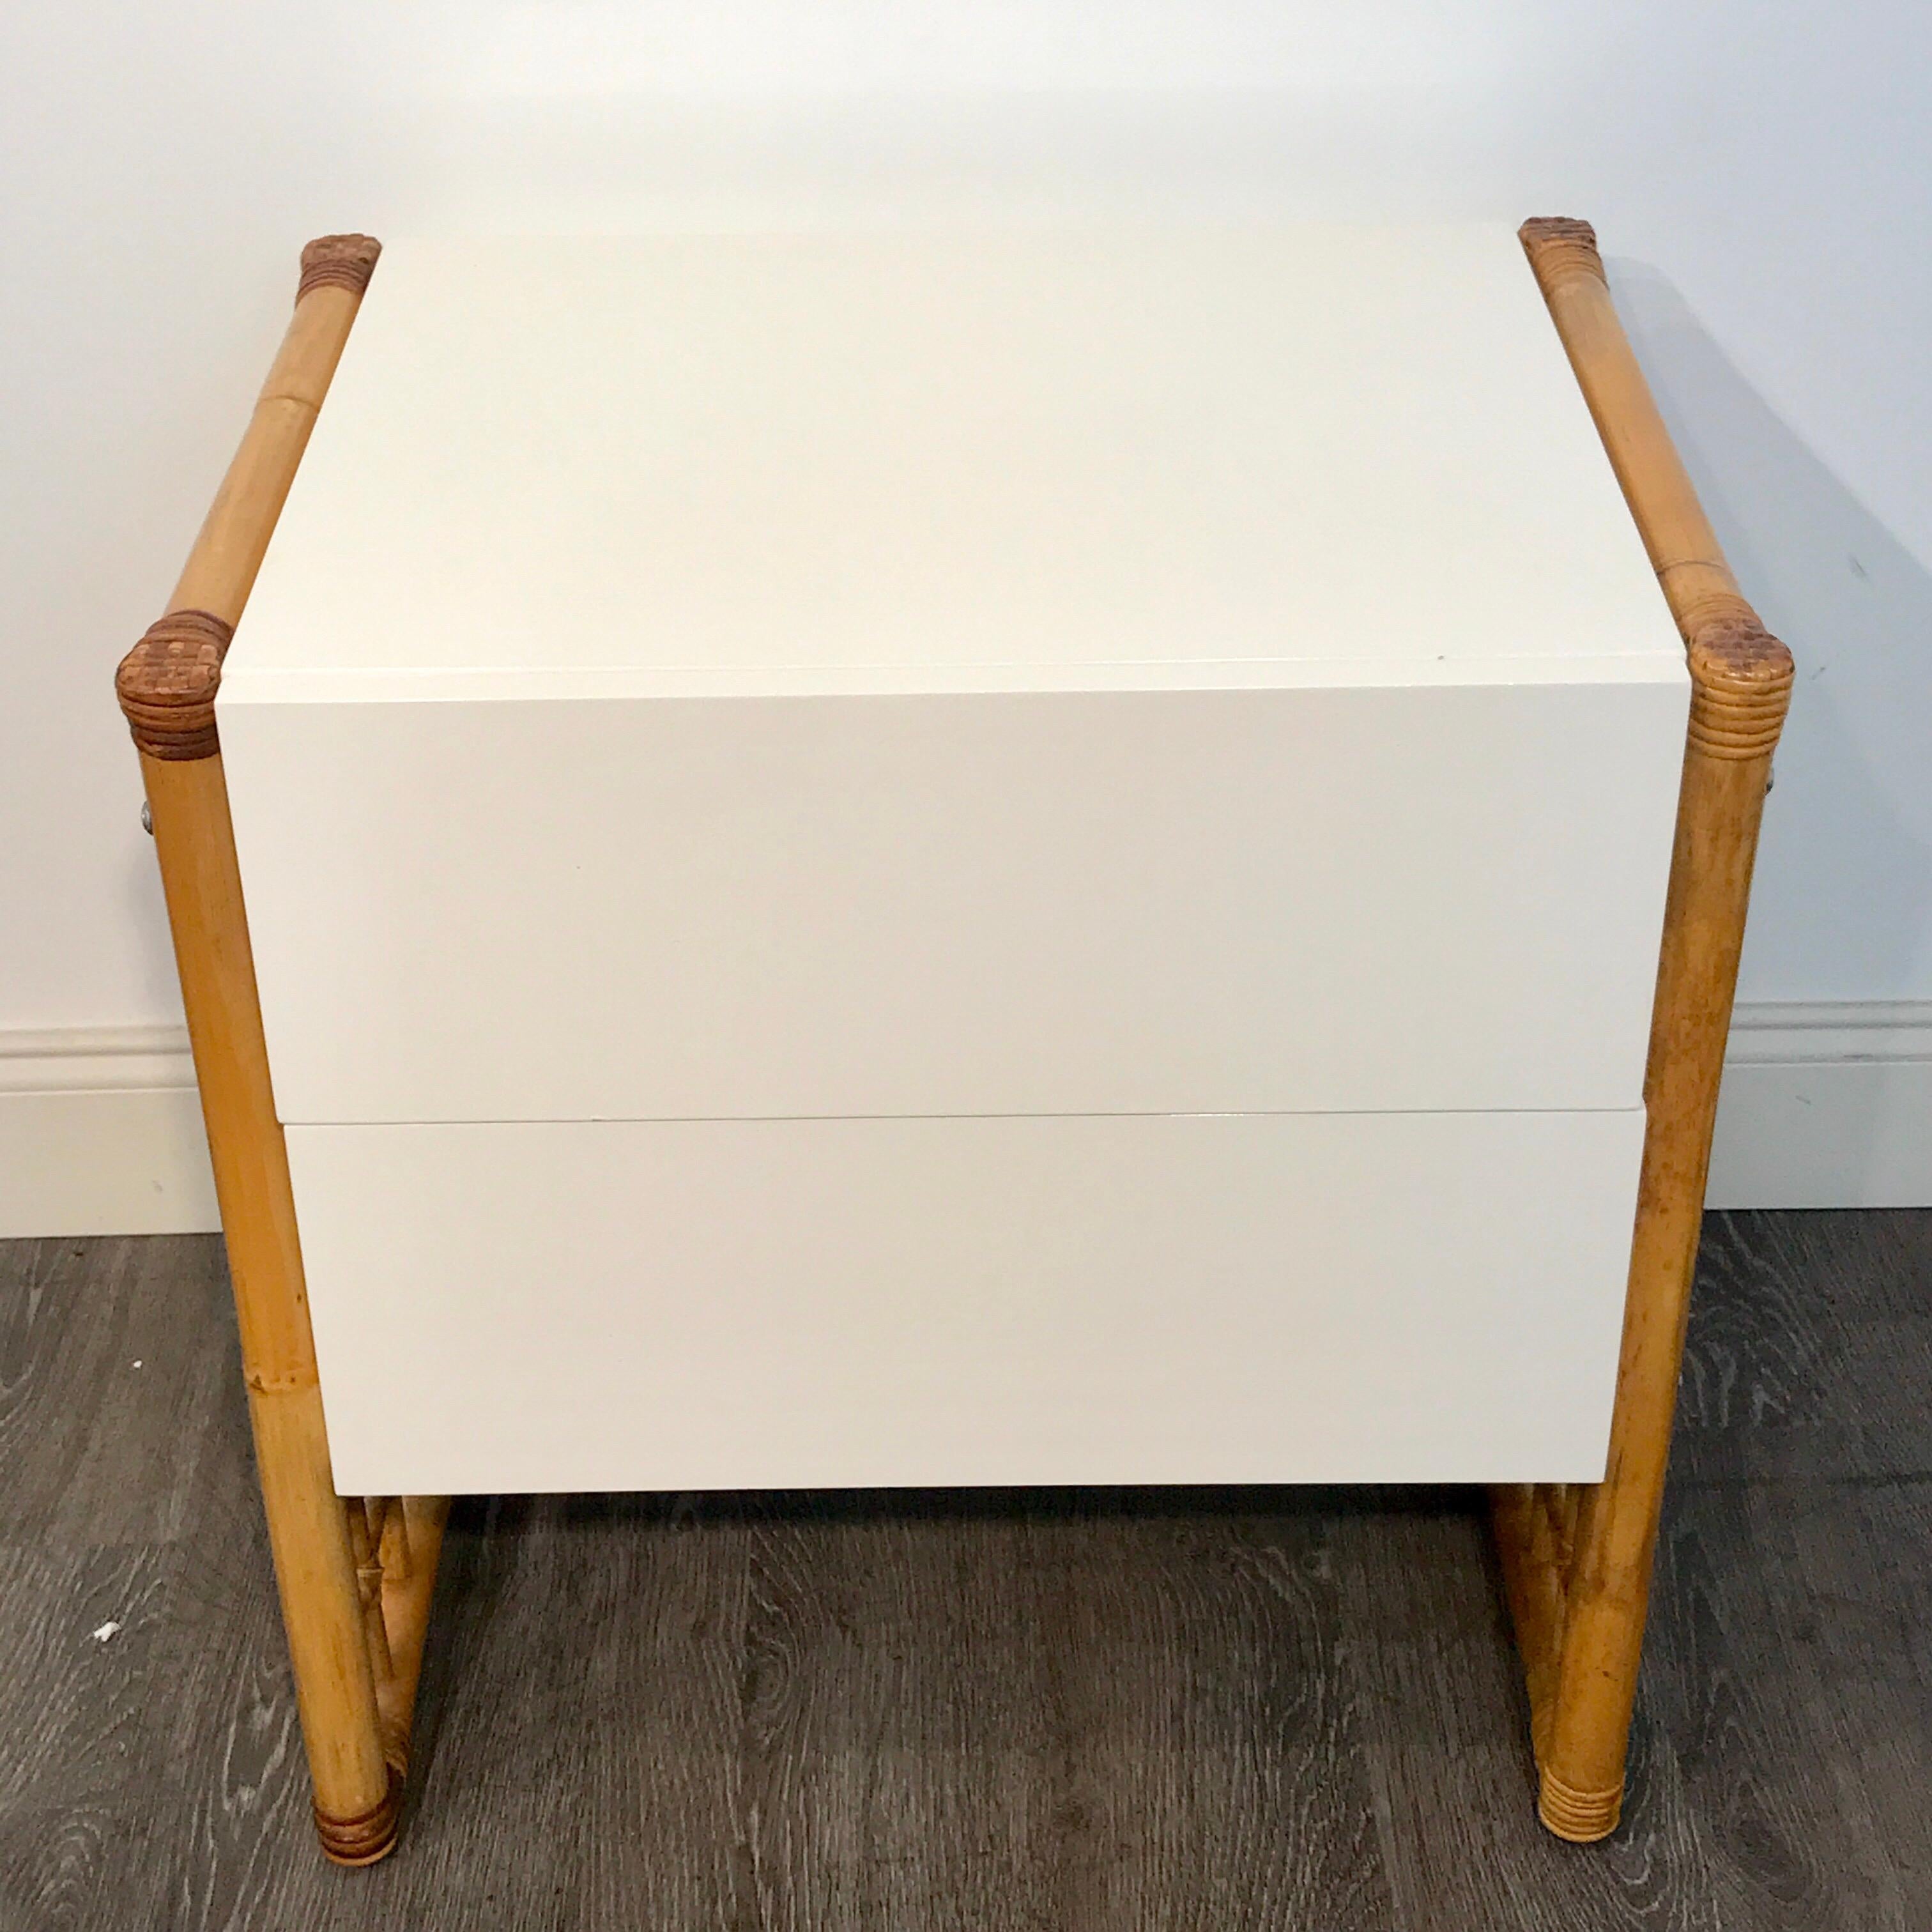 Pair of Sleek Modern White Lacquered and Rattan End Tables or Nightstands 1